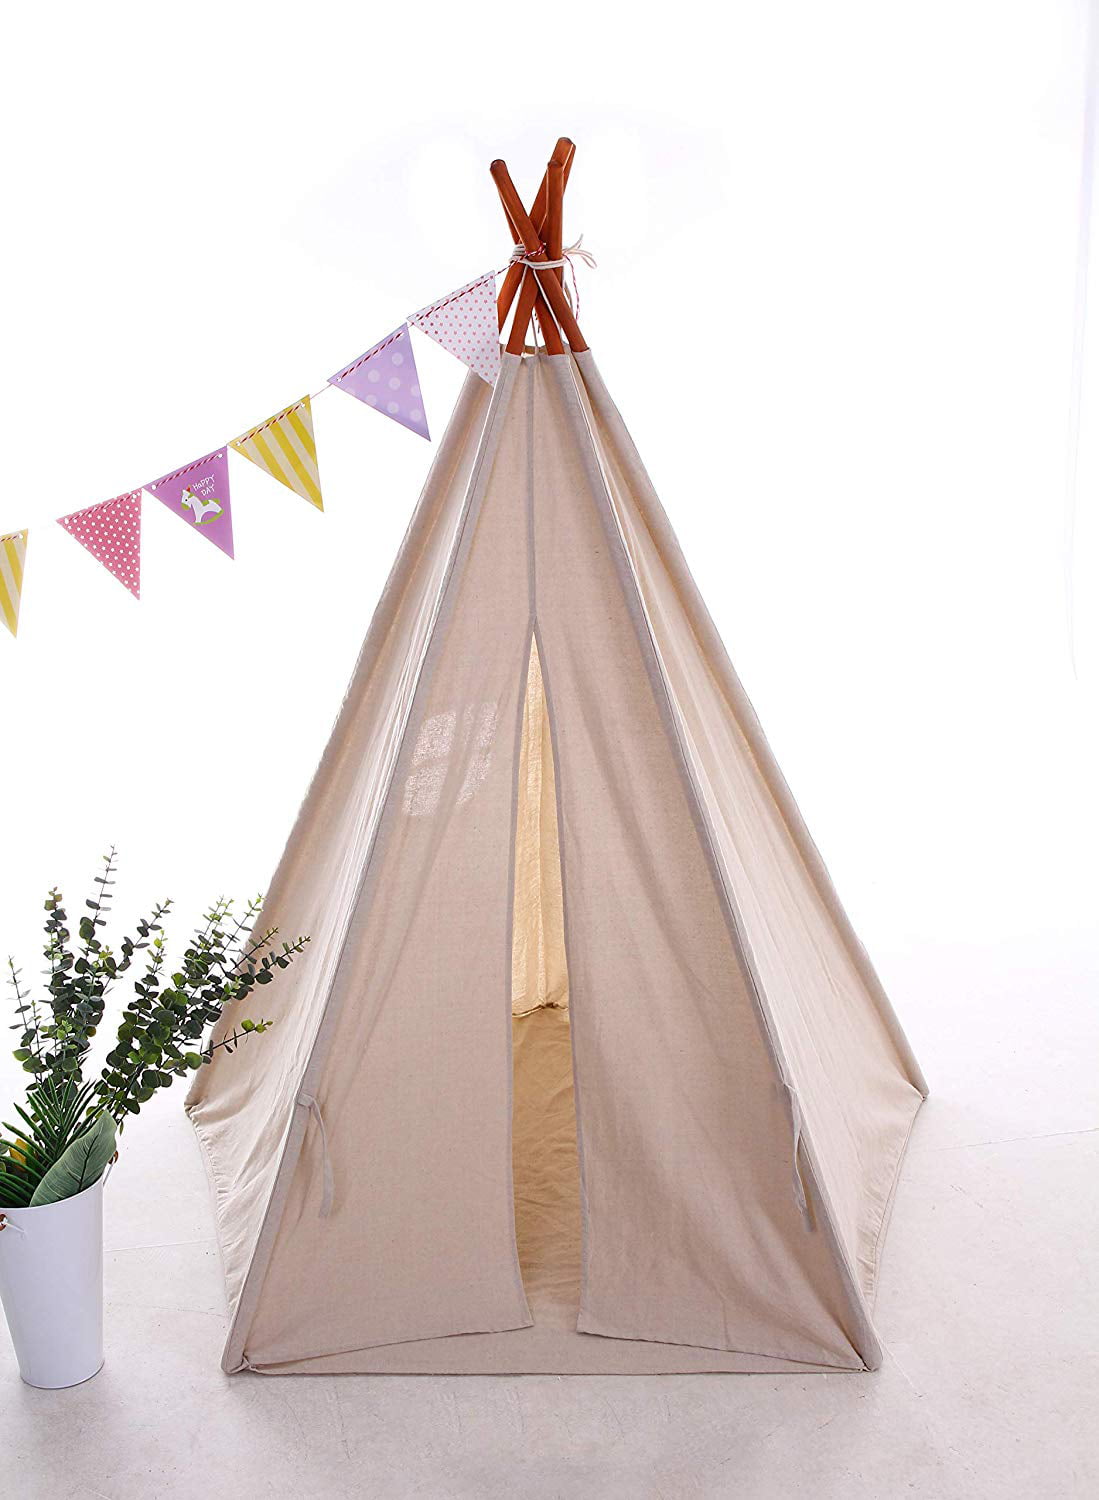 Teepee Tent for Kids Teepee Play Tent for Indoor Outdoor Pop Up Tent Beach 